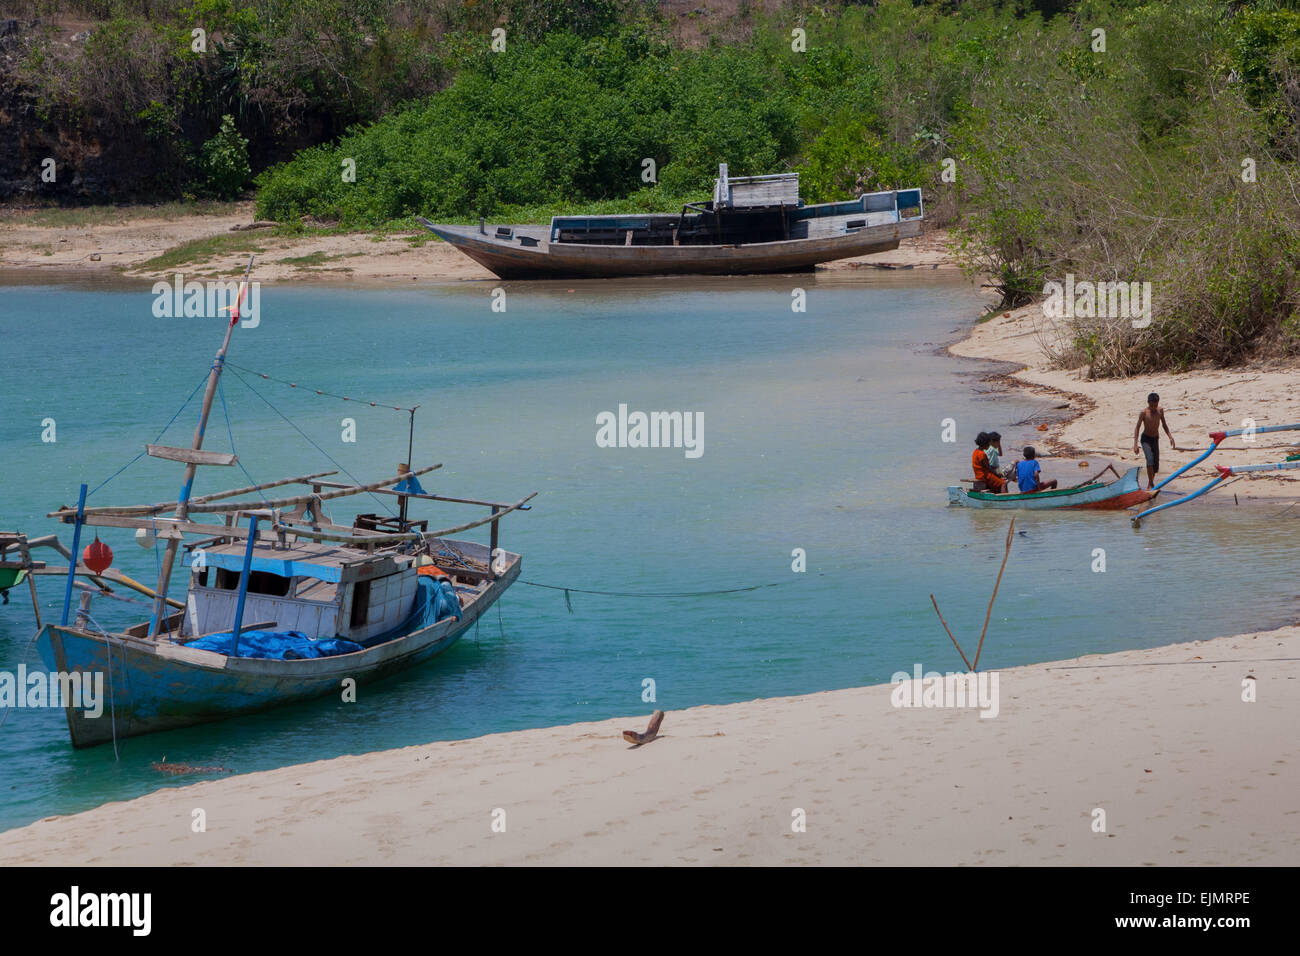 A sandy beach and fishing boats on a lagoon-like seascape in the fishing beach of Pero in Pero Batang villlage, Kodi, Southwest Sumba, Indonesia. Stock Photo